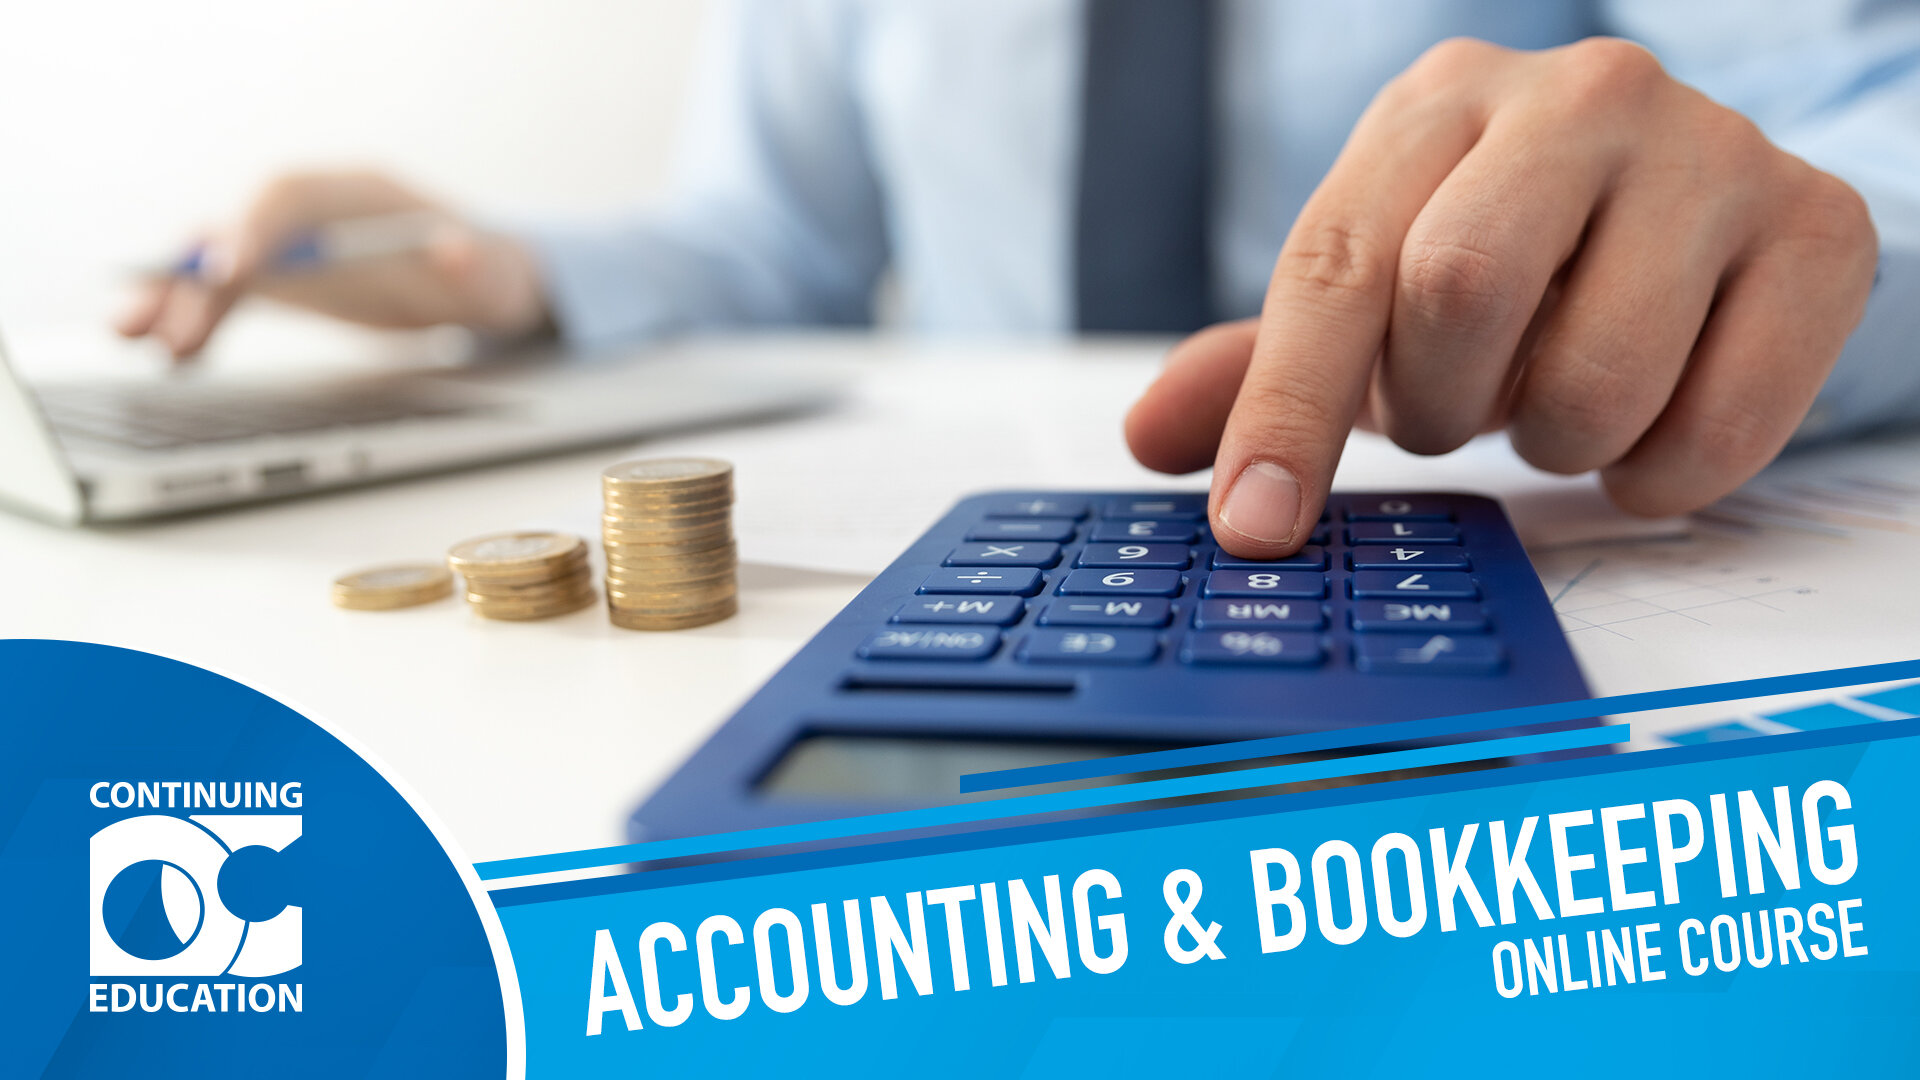 CE-Course-AccountingBookkeeping.jpg